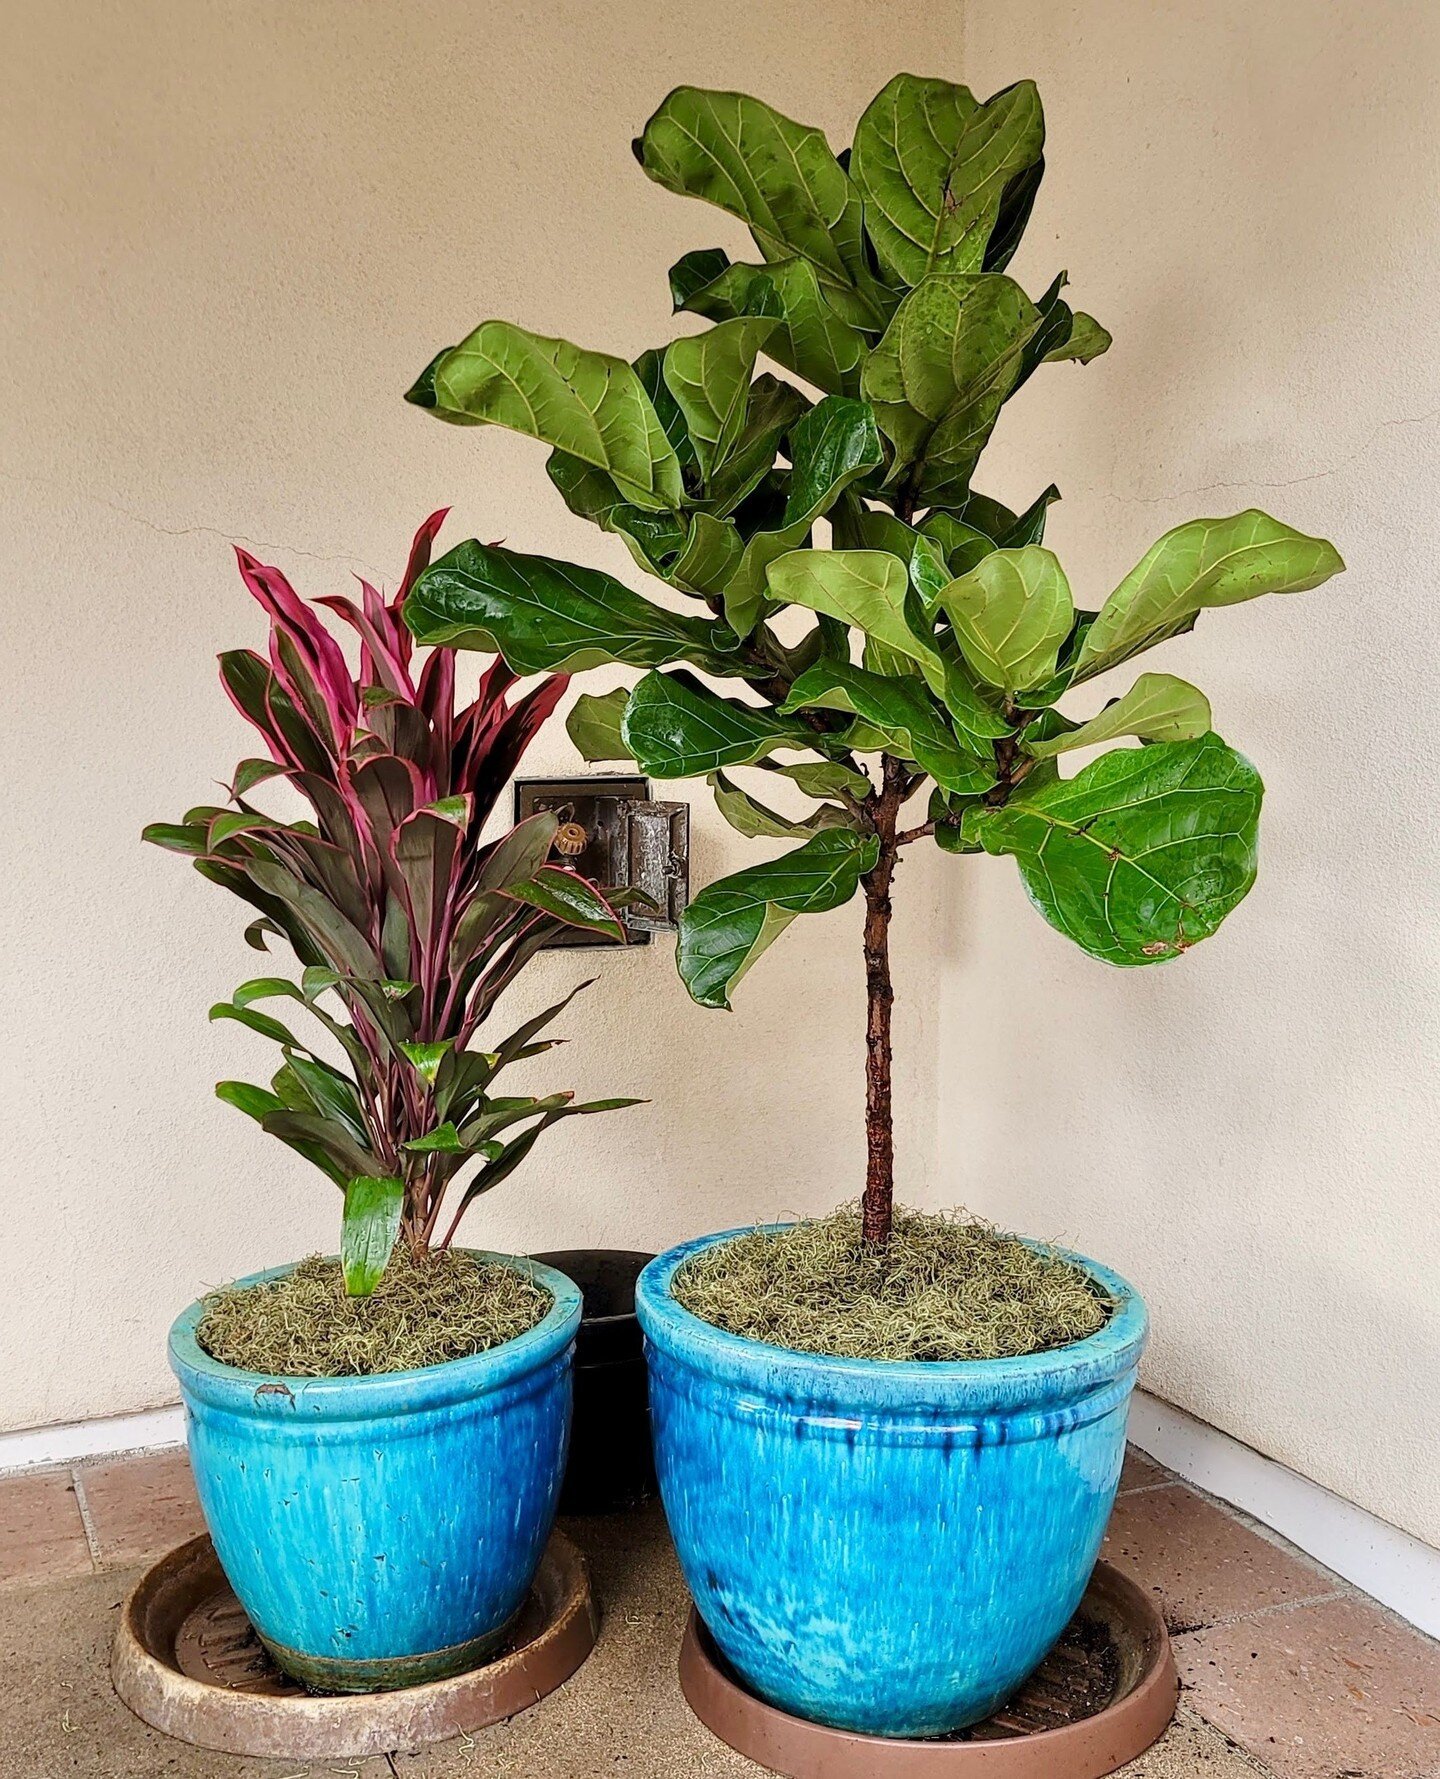 Everyone loves a Fiddle Leaf Fig 💞 but can you grow them outside? 🤔⁠
⁠
They absolutely can thrive outside but with caution. A Fiddle's natural climate is warm and humid with a lot of natural light. The California climate is ideal in most areas, but